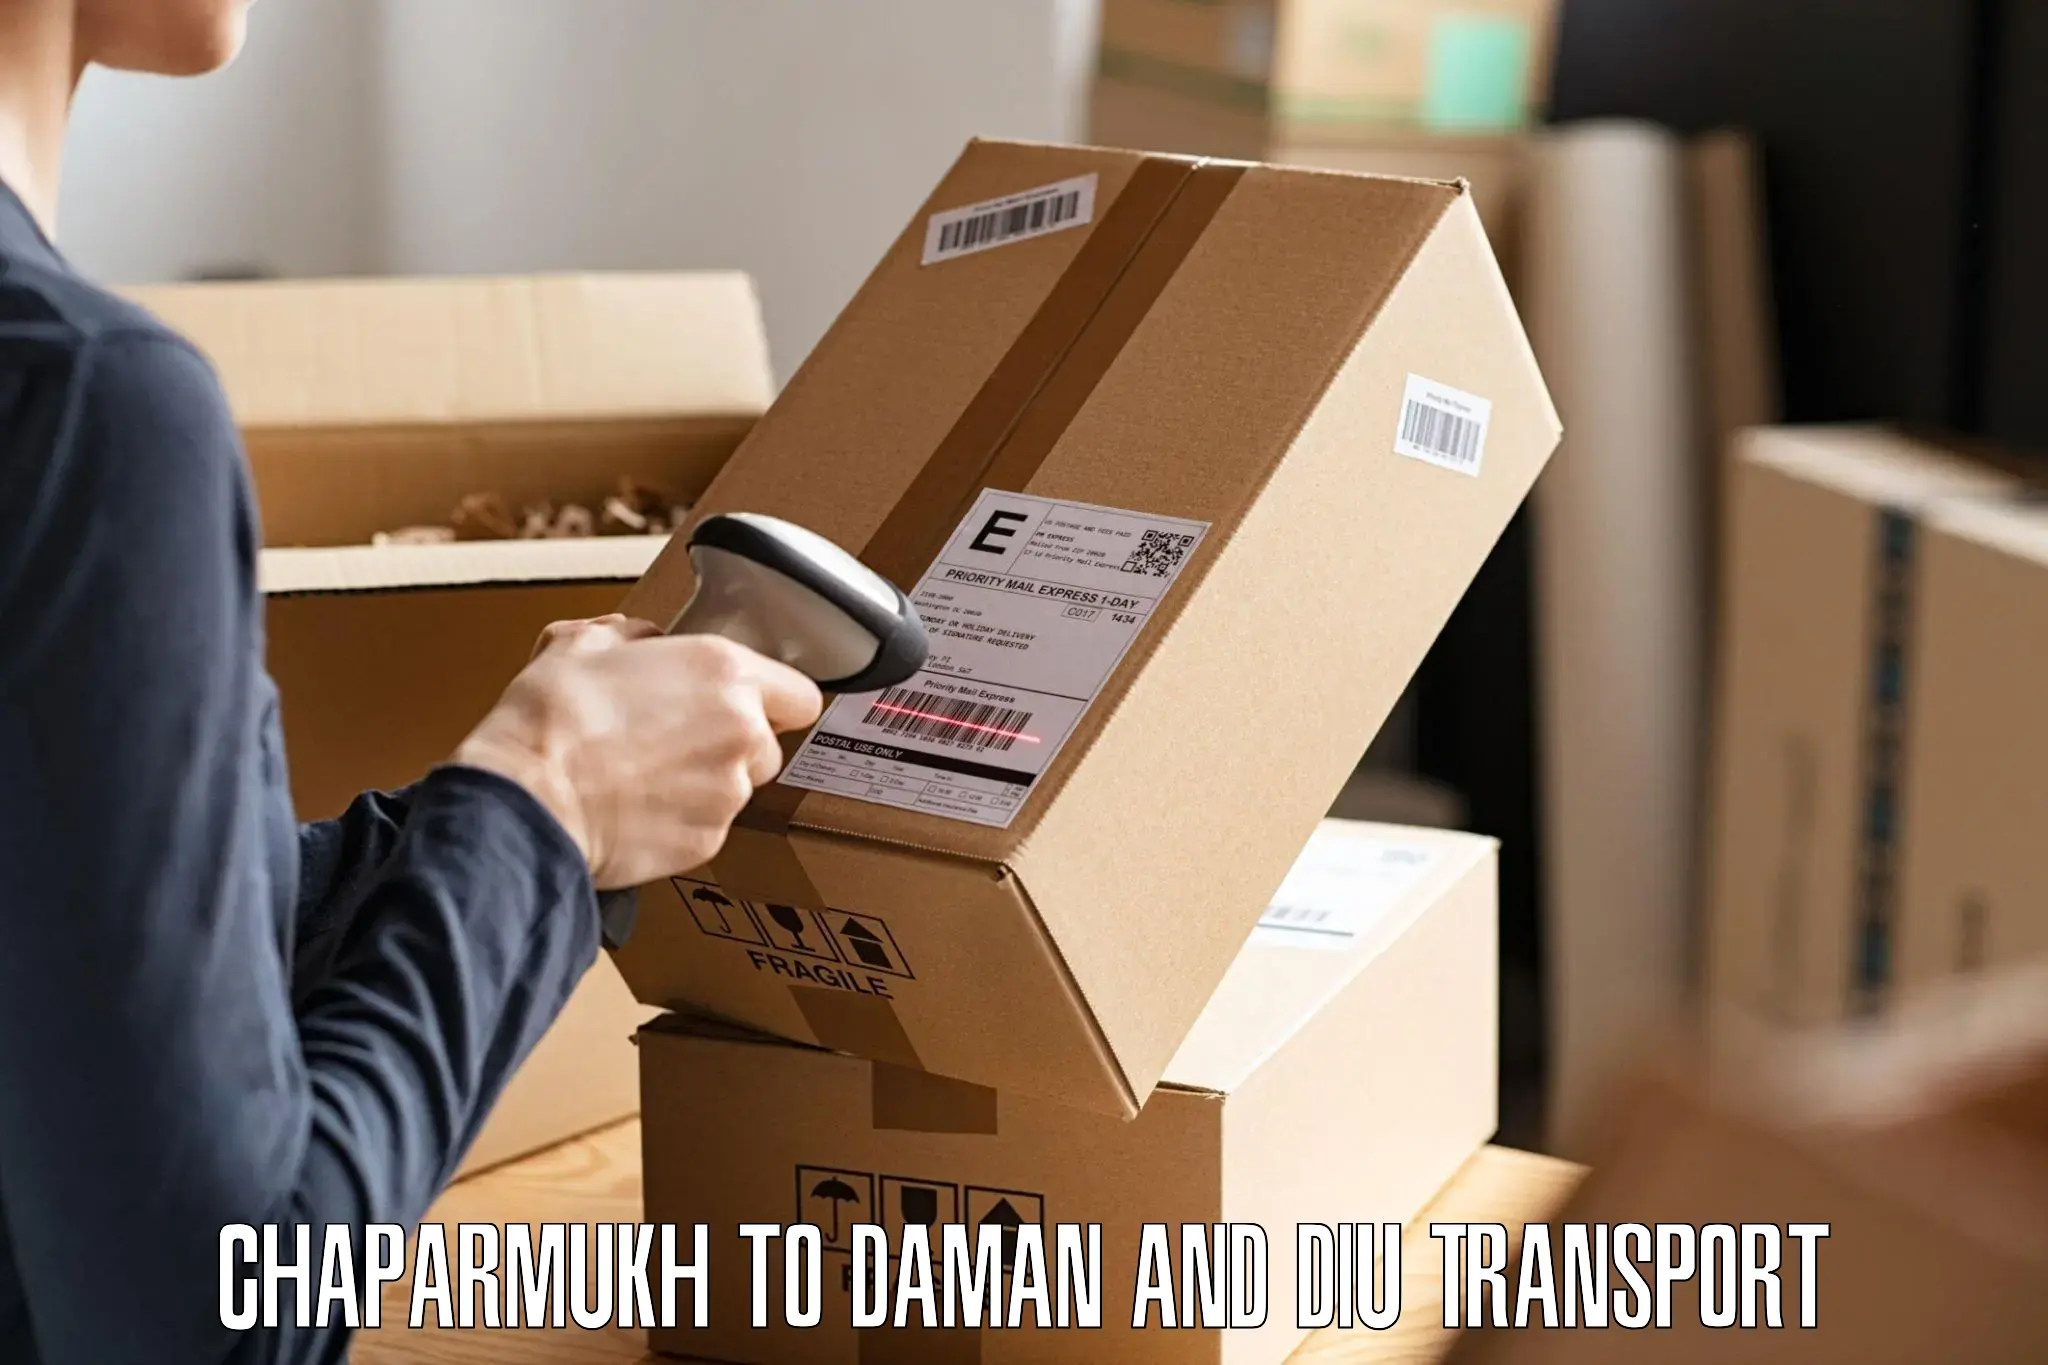 Daily parcel service transport Chaparmukh to Diu